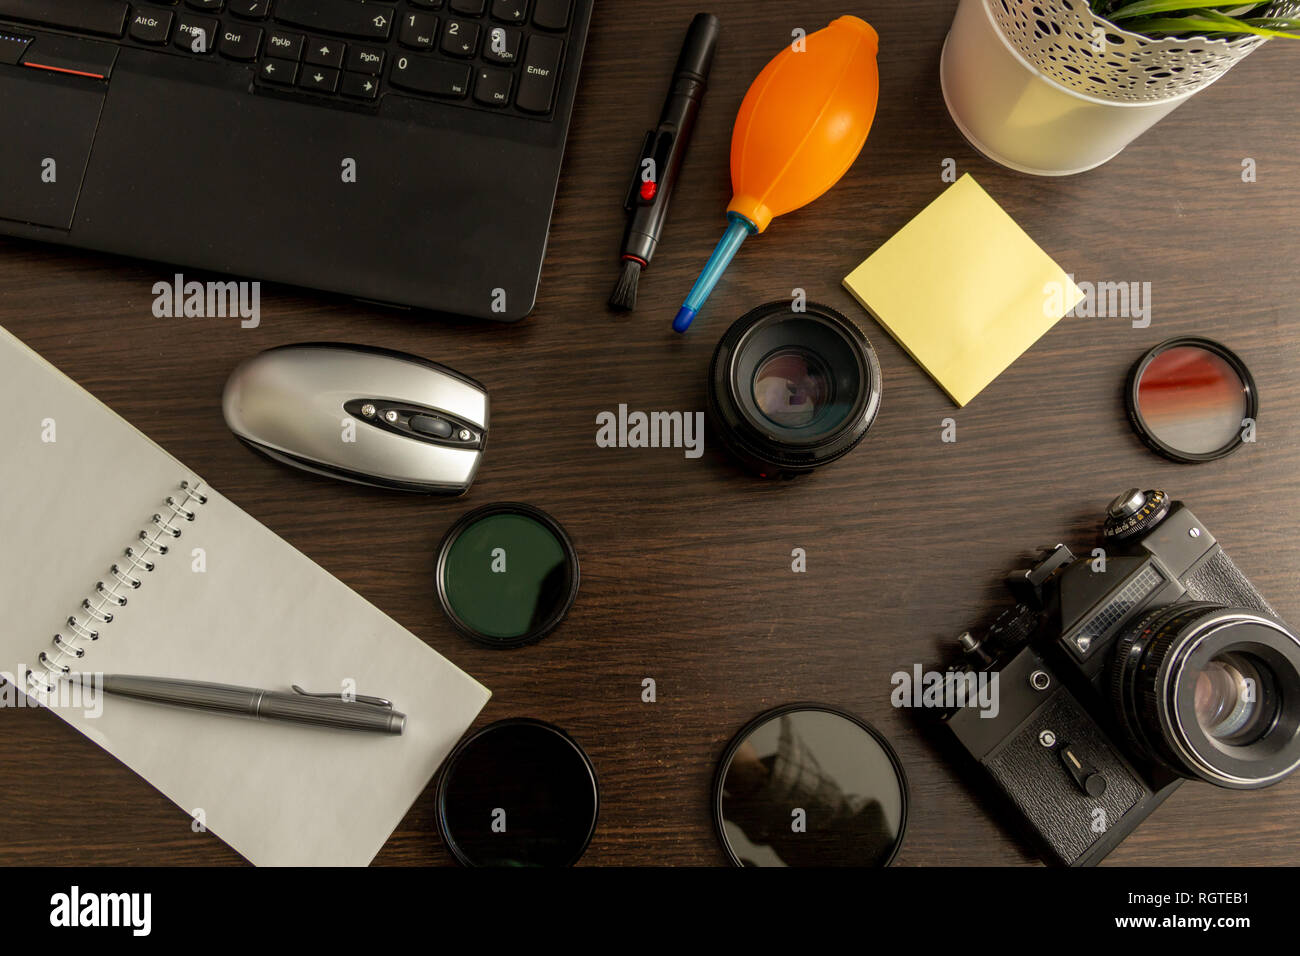 Photographer at the Desk, Office Gadgets and Object Lens Stock Image -  Image of floor, professional: 71143951